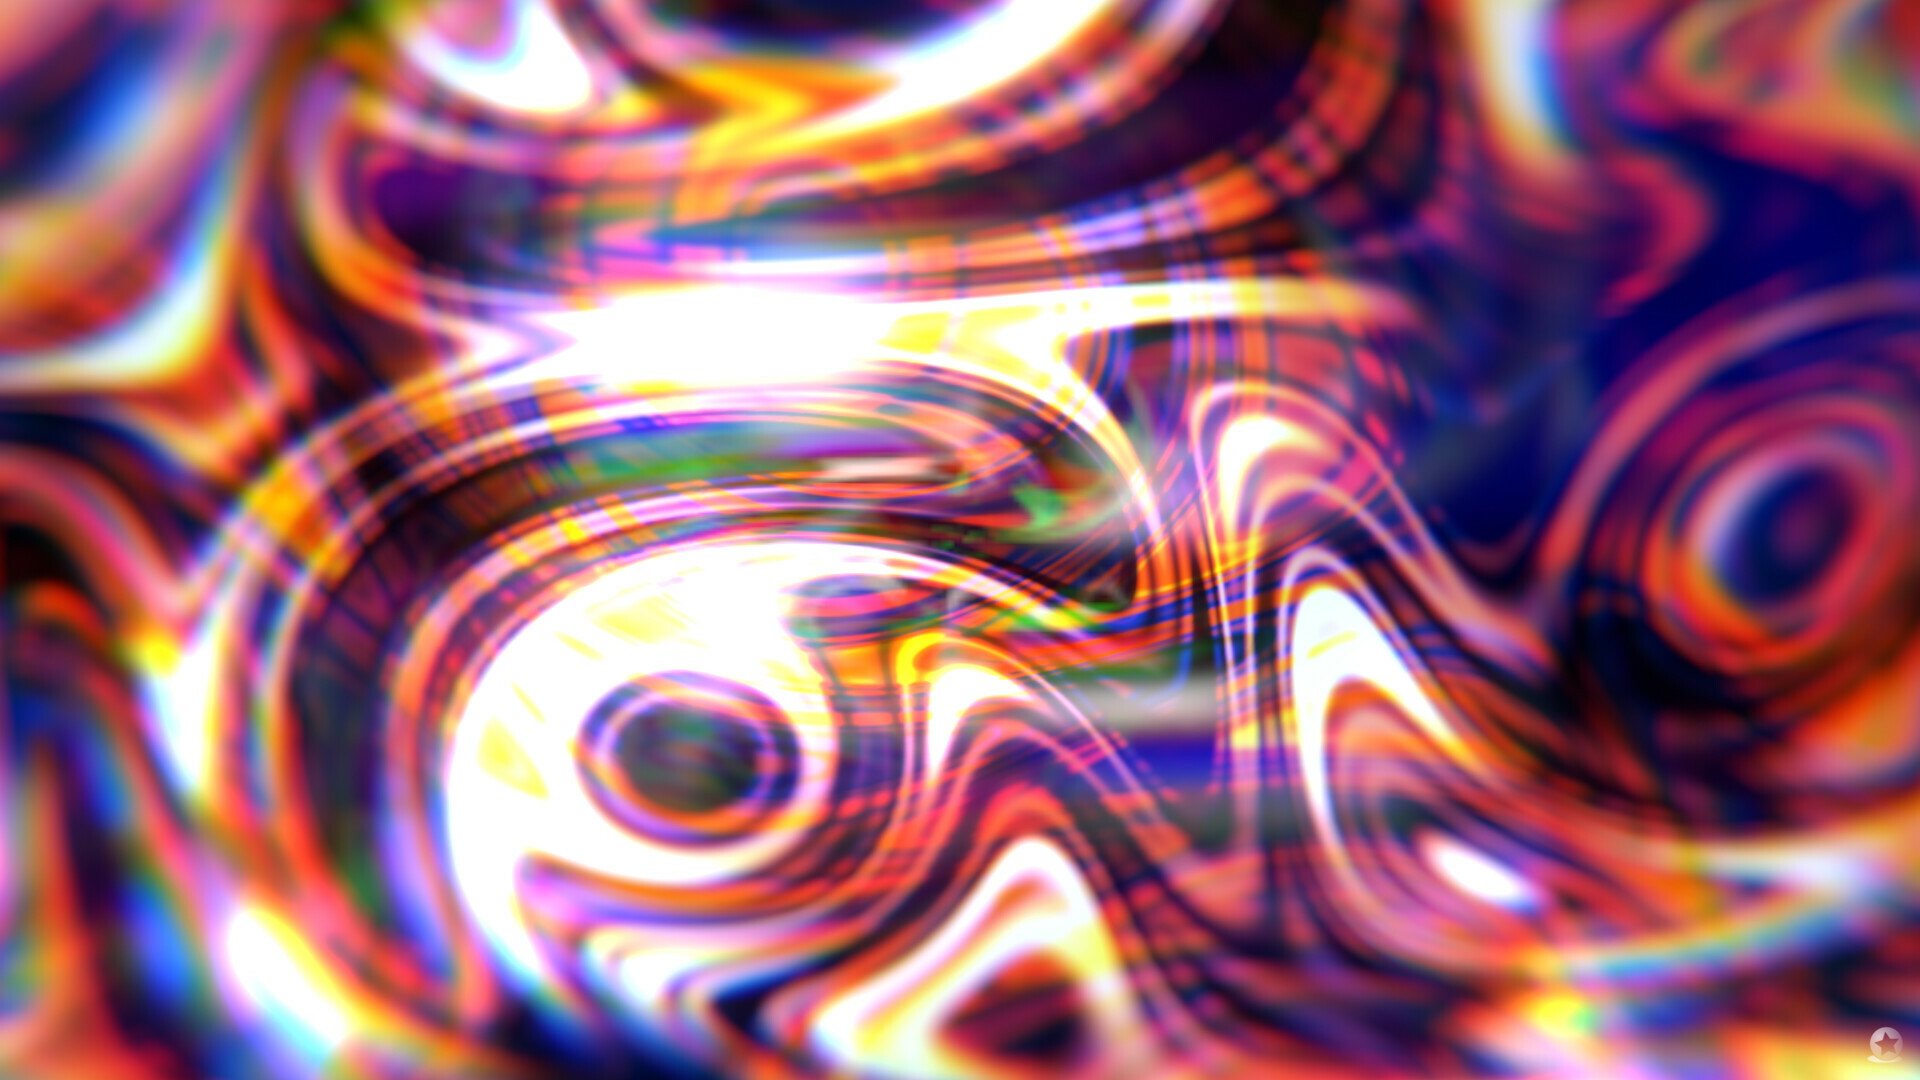 Abstract Psychedelic Colorful Waves Dreamscape Glass 1920x1080